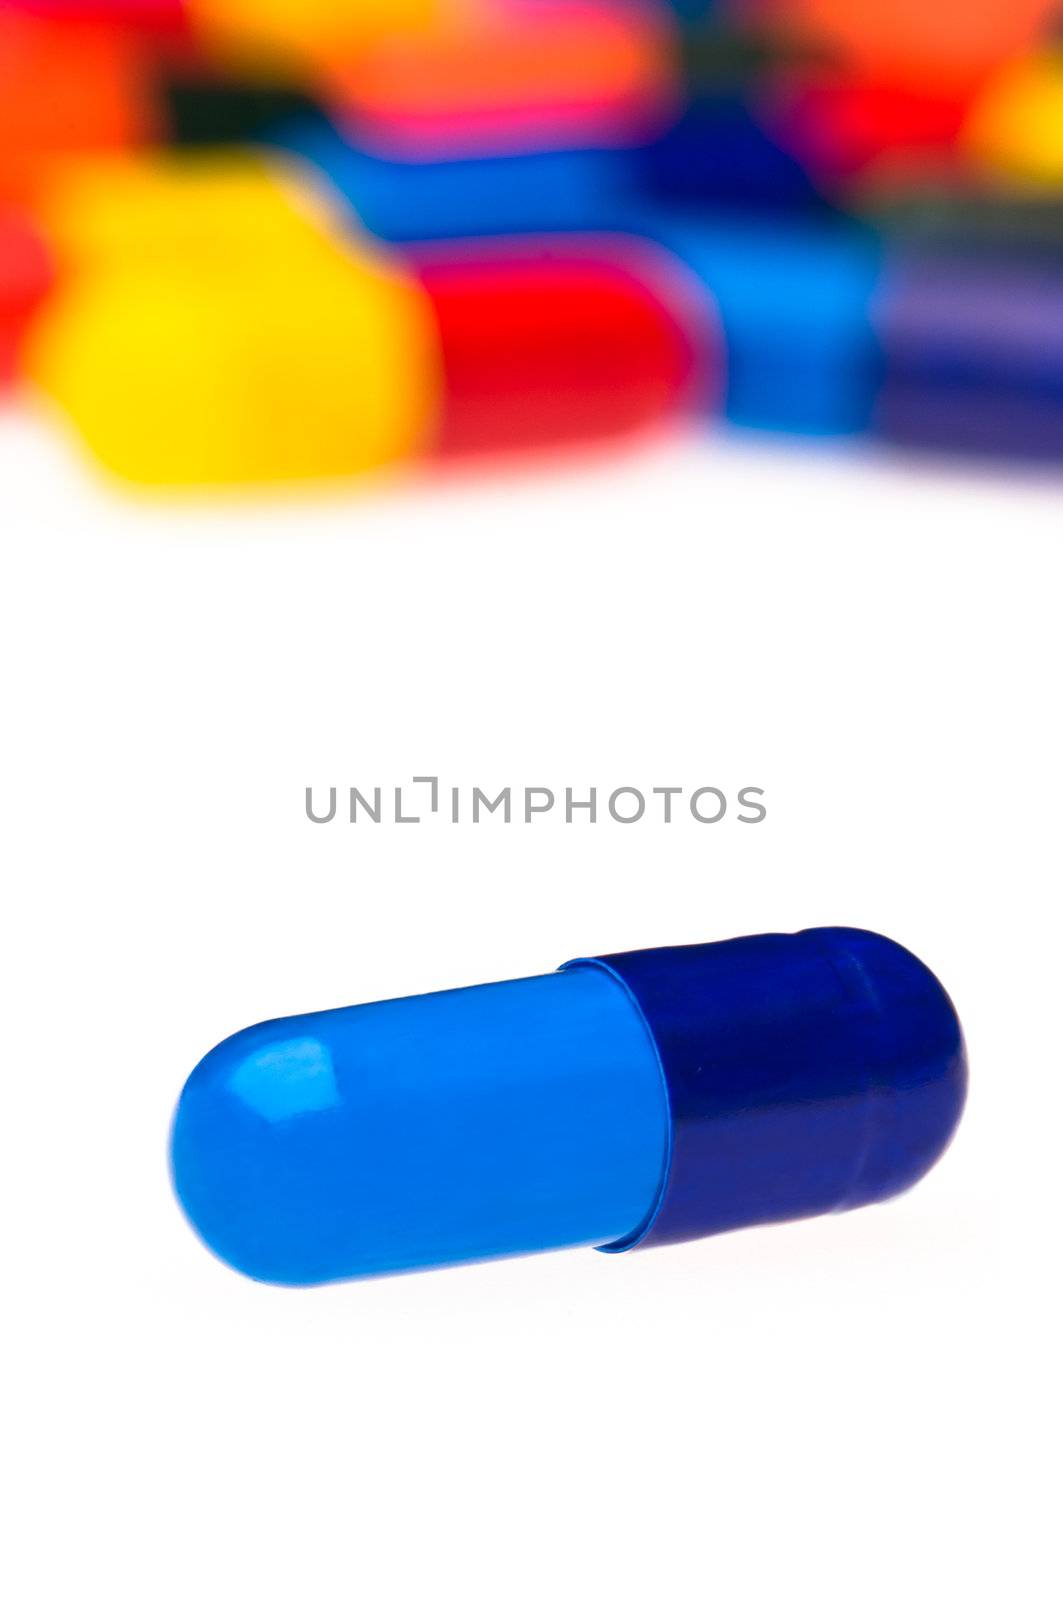 One blue capsule in front of many colorful, blurry in the background